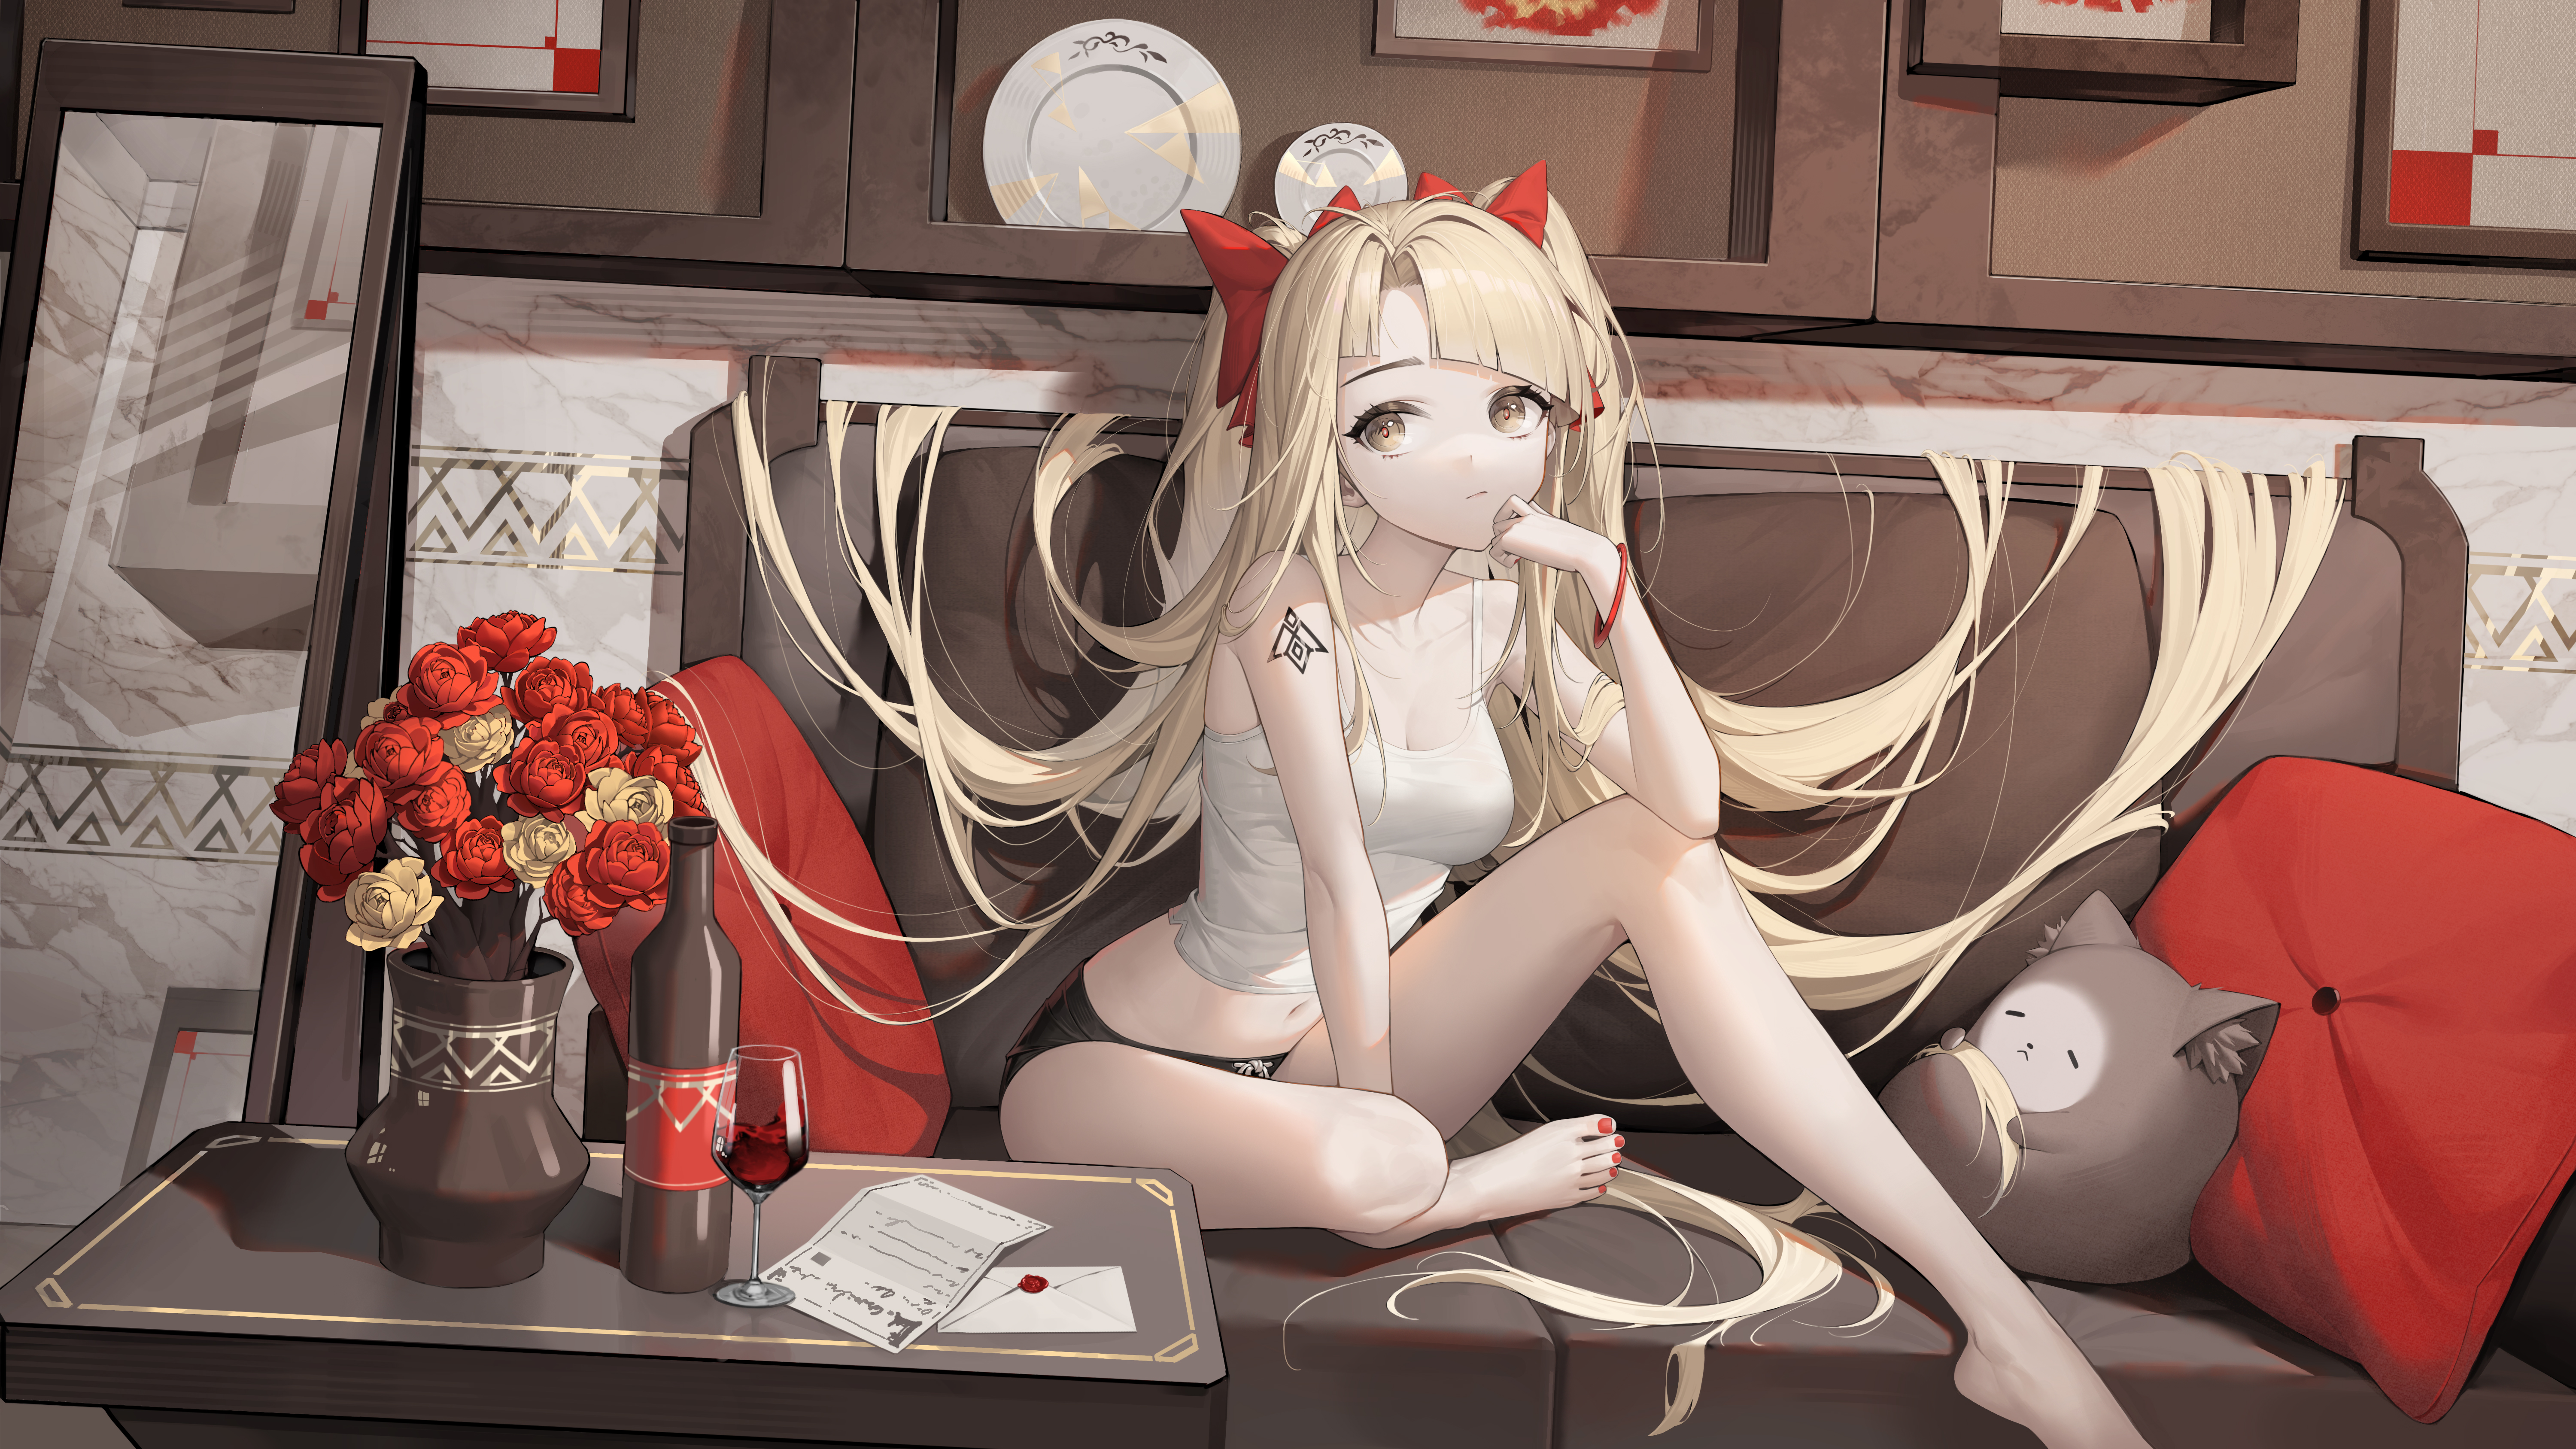 Anime 6000x3375 blonde long hair couch underwear drink flowers gray eyes mirror anime girls bracelets looking away sitting table wine bottles drinking glass paper letter plates pillow indoors women indoors panties feet